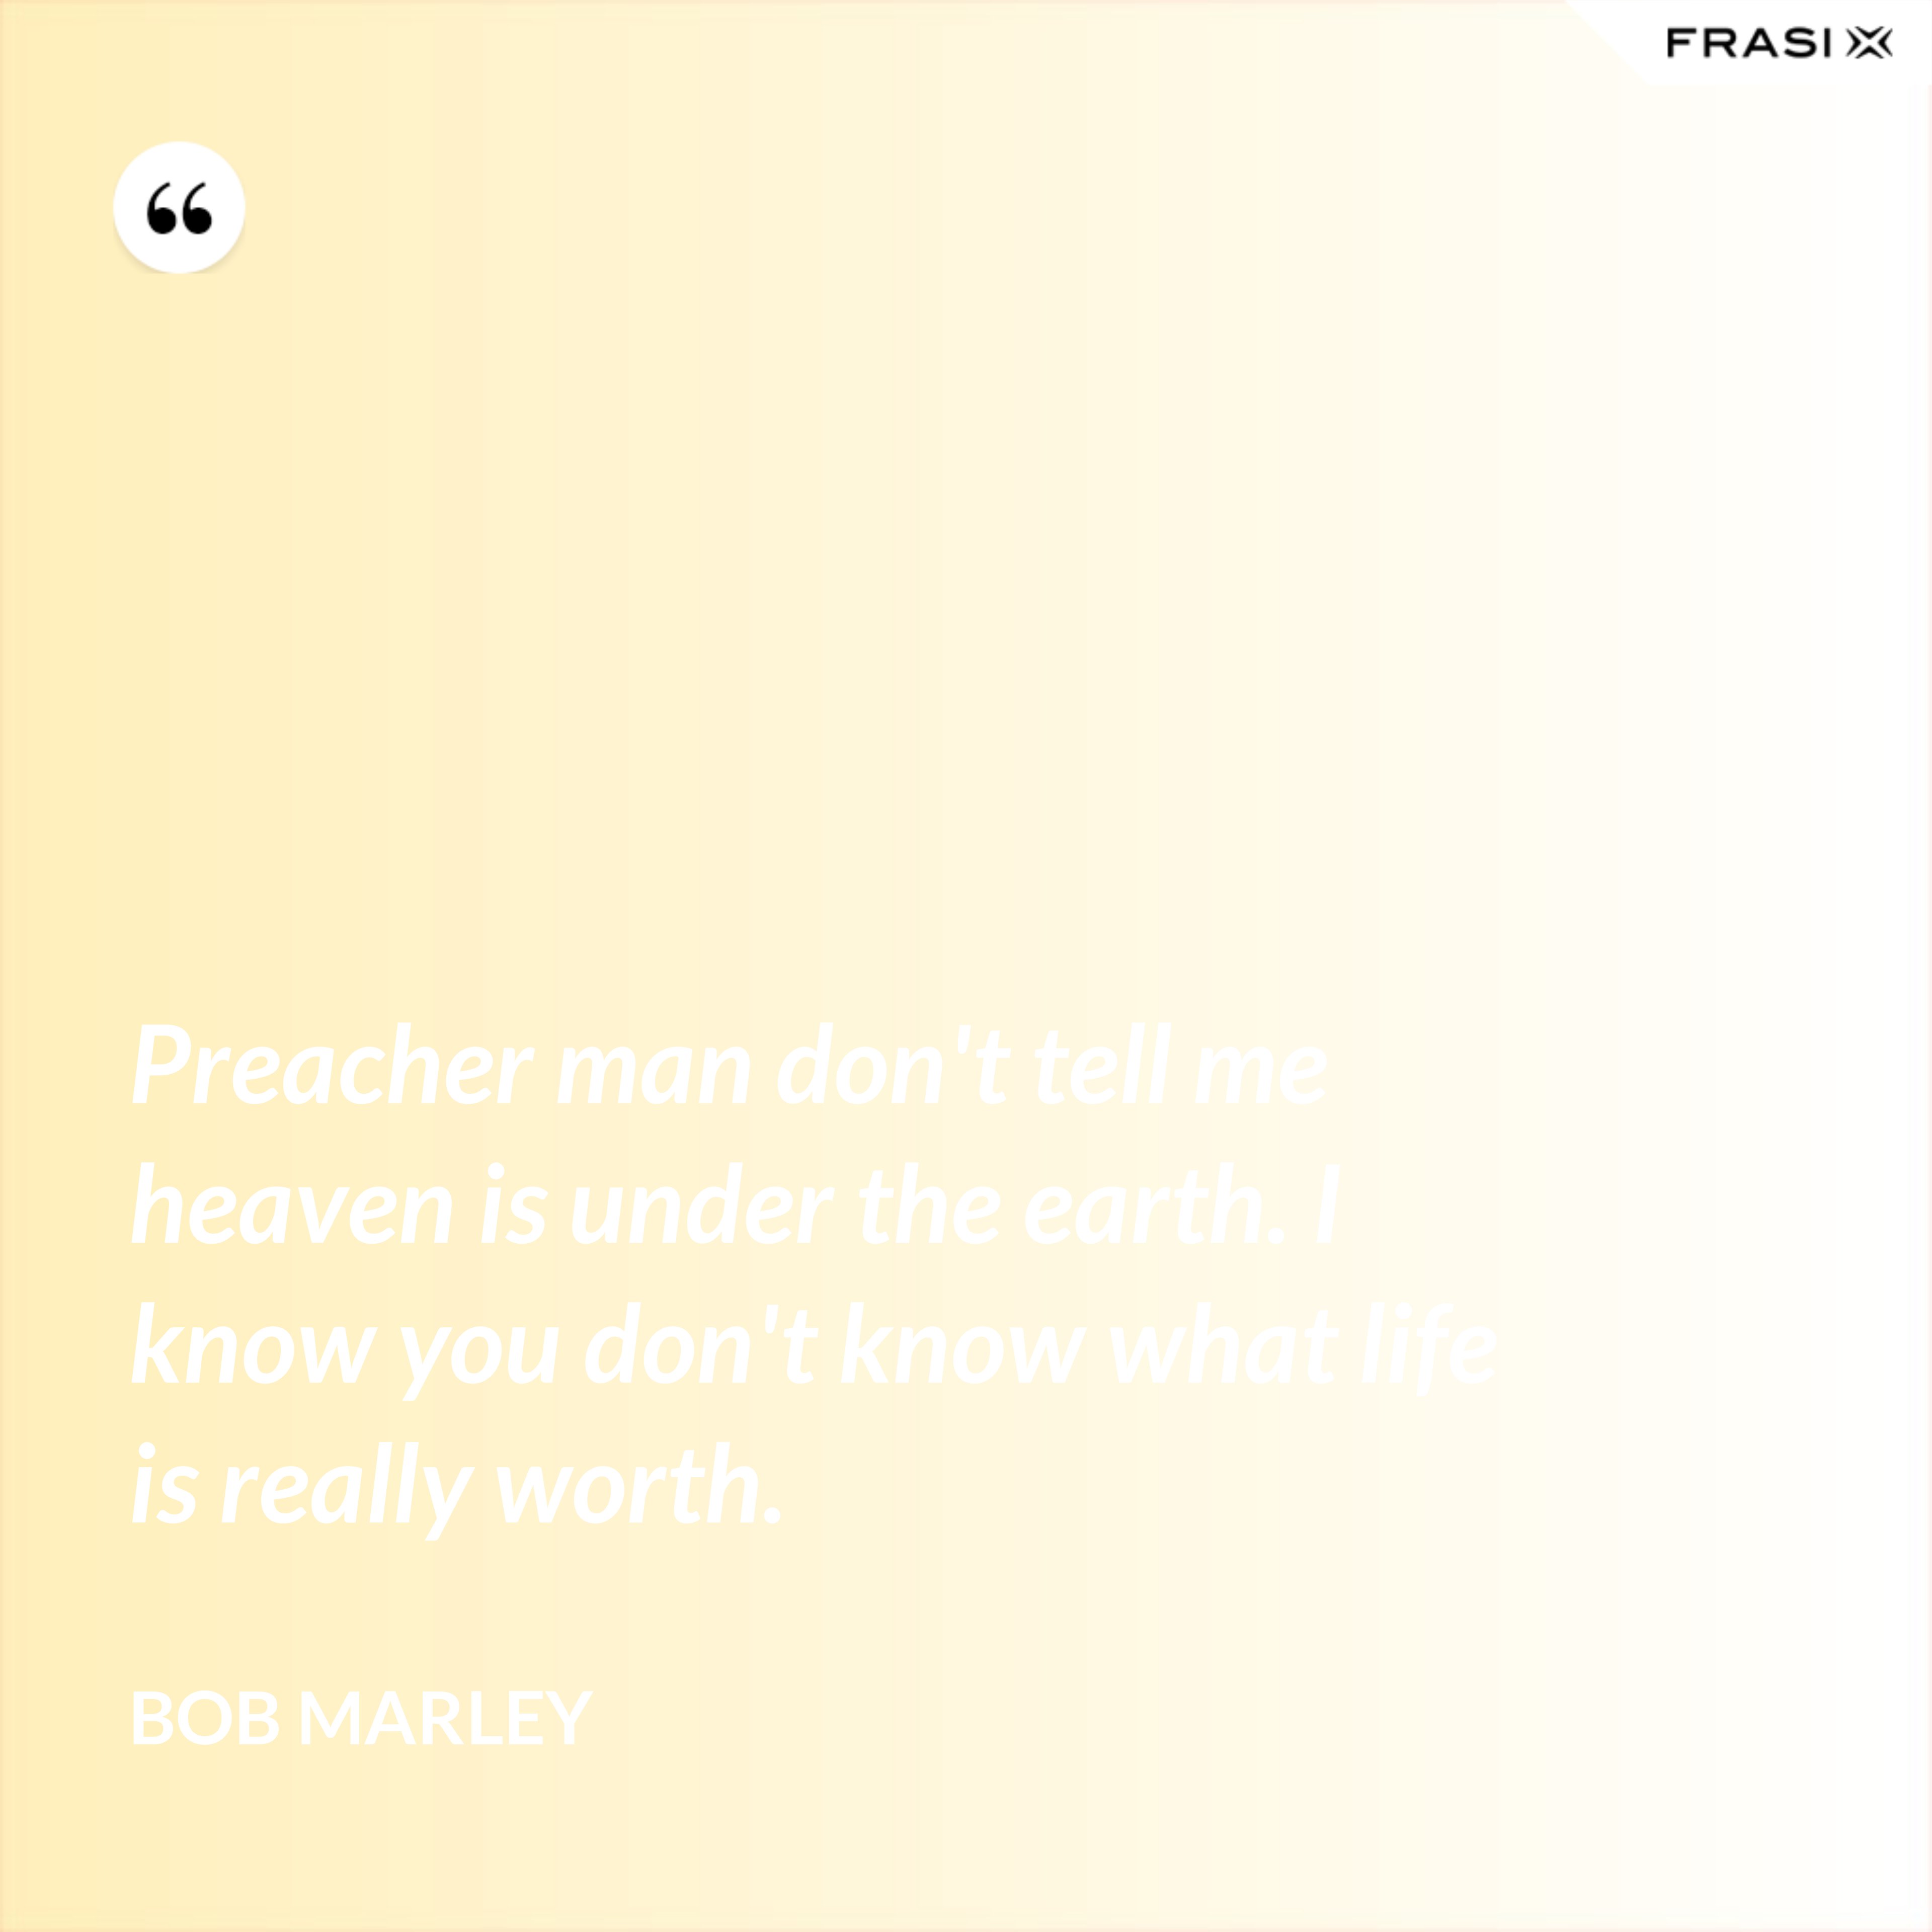 Preacher man don't tell me heaven is under the earth. I know you don't know what life is really worth. - Bob Marley